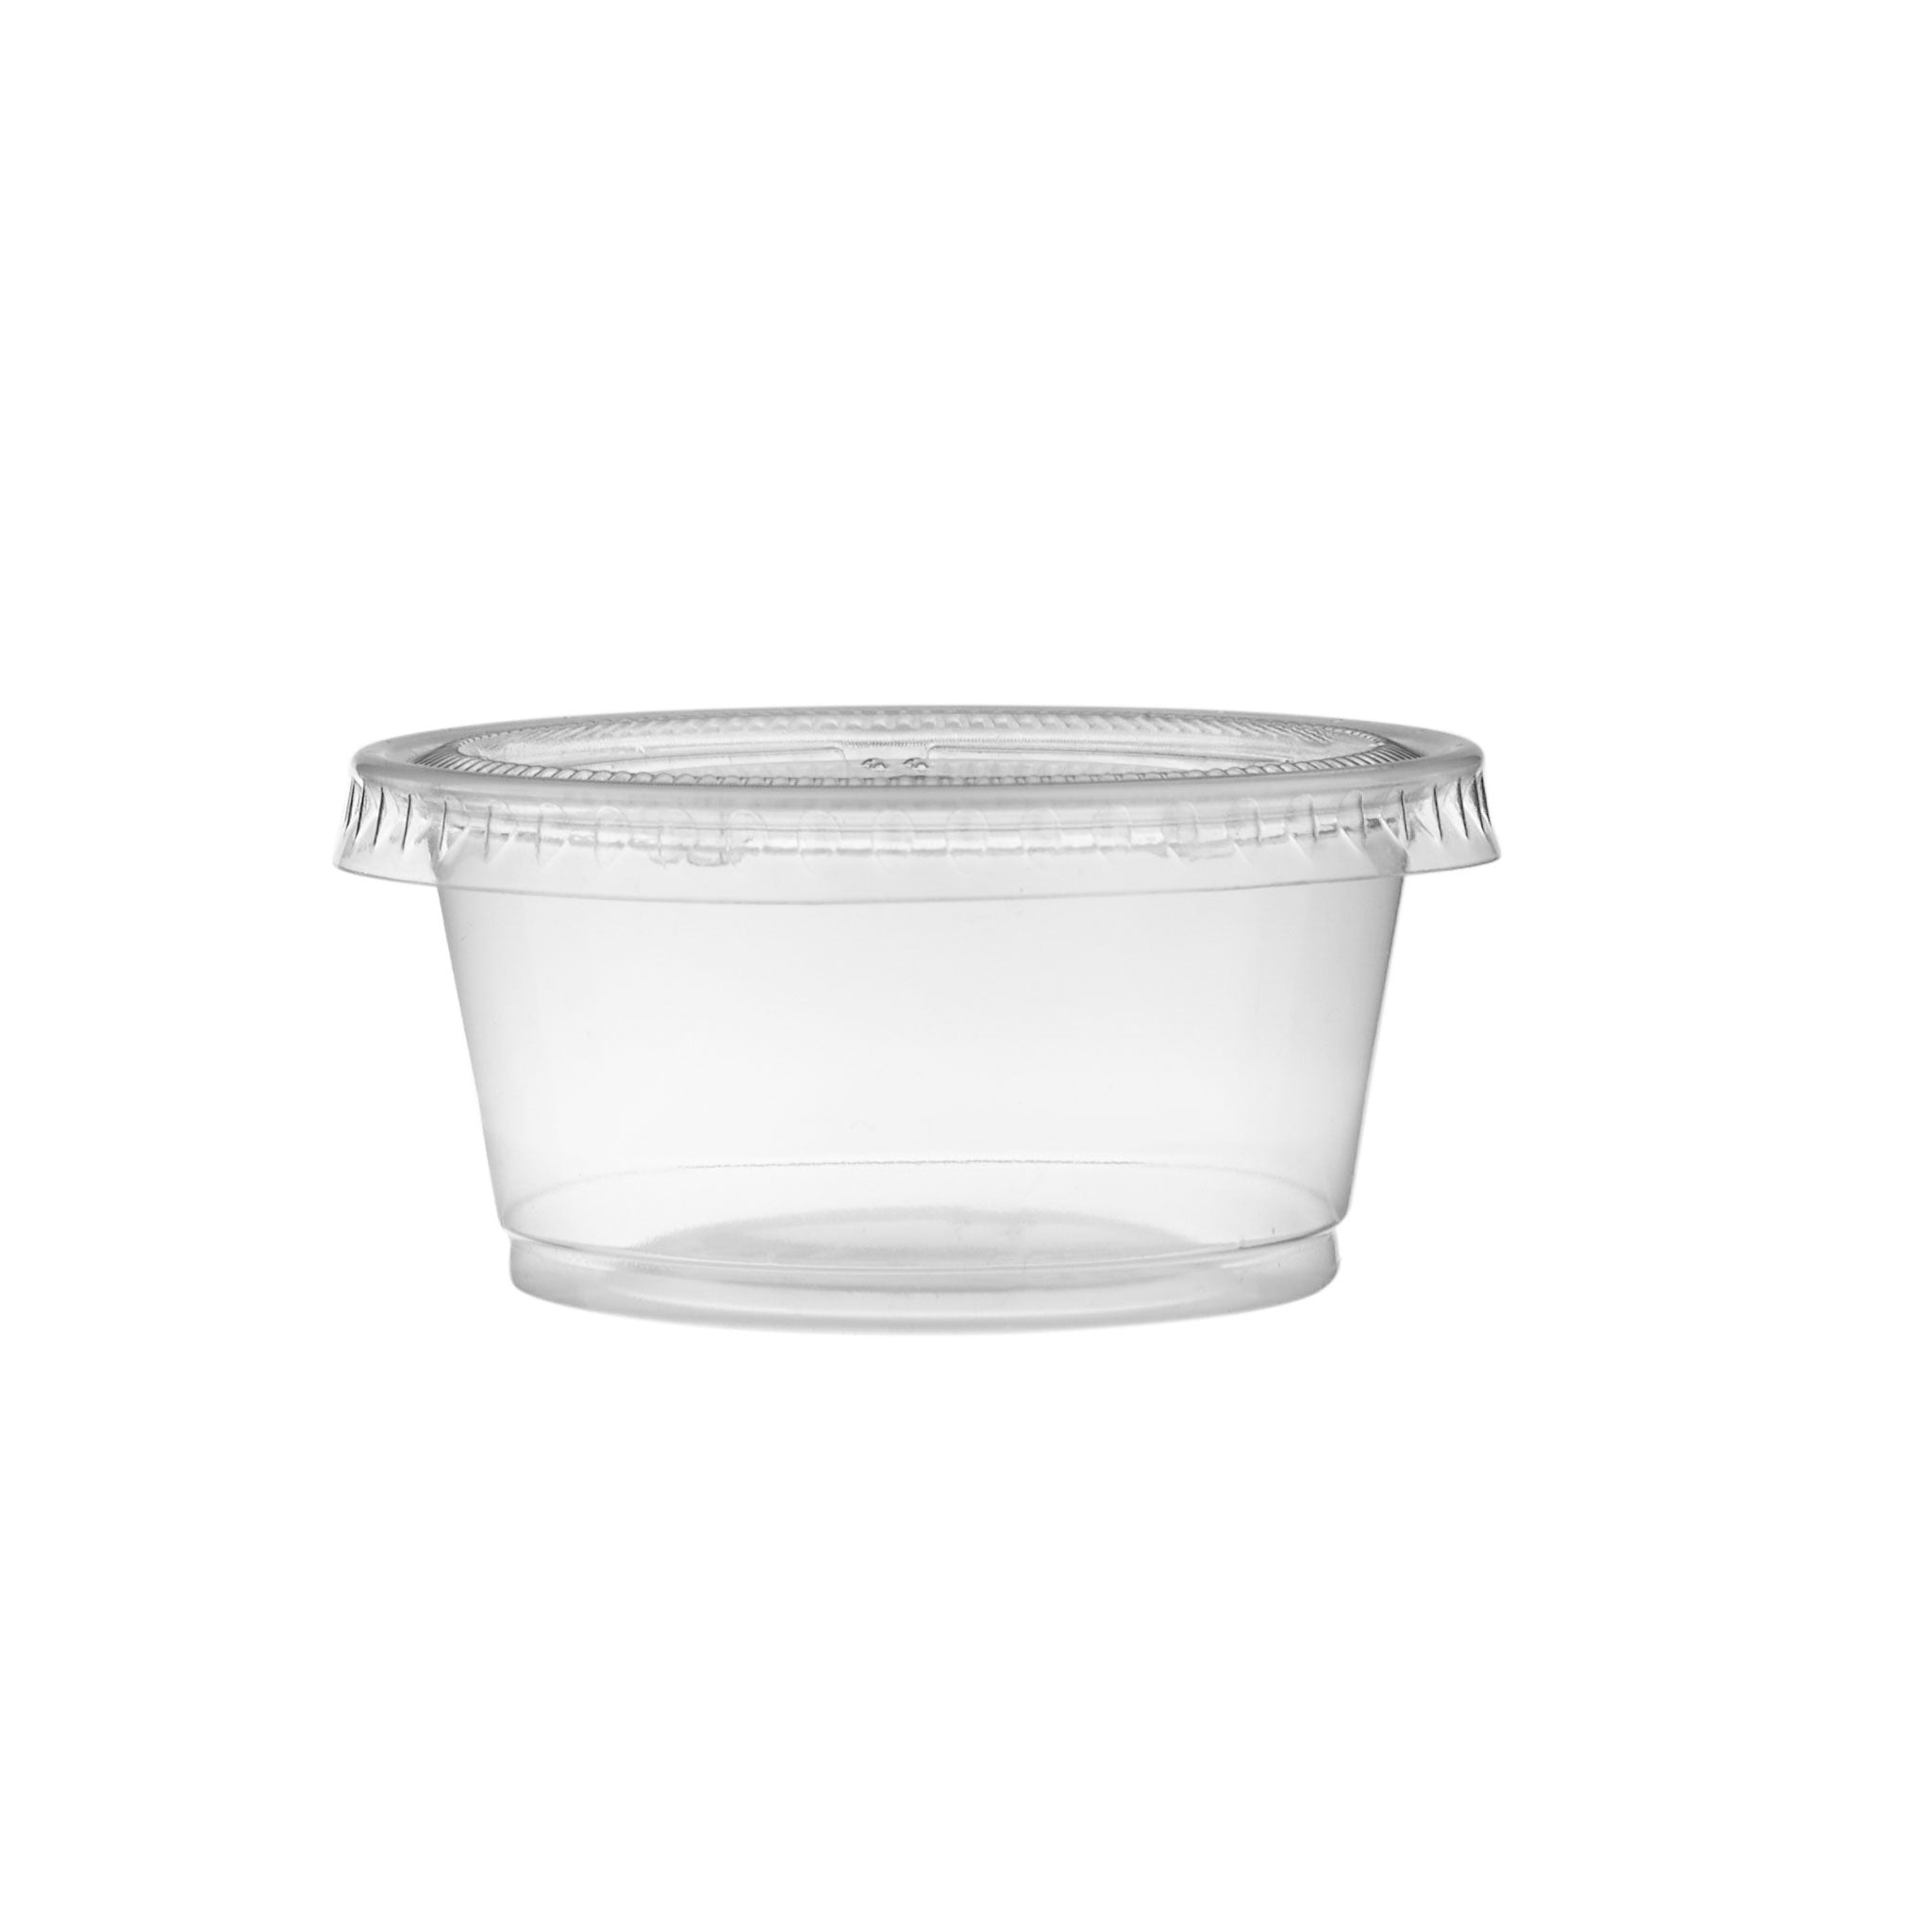 2 Oz Clear Portion Cup 2500 Pieces - Hotpack Oman